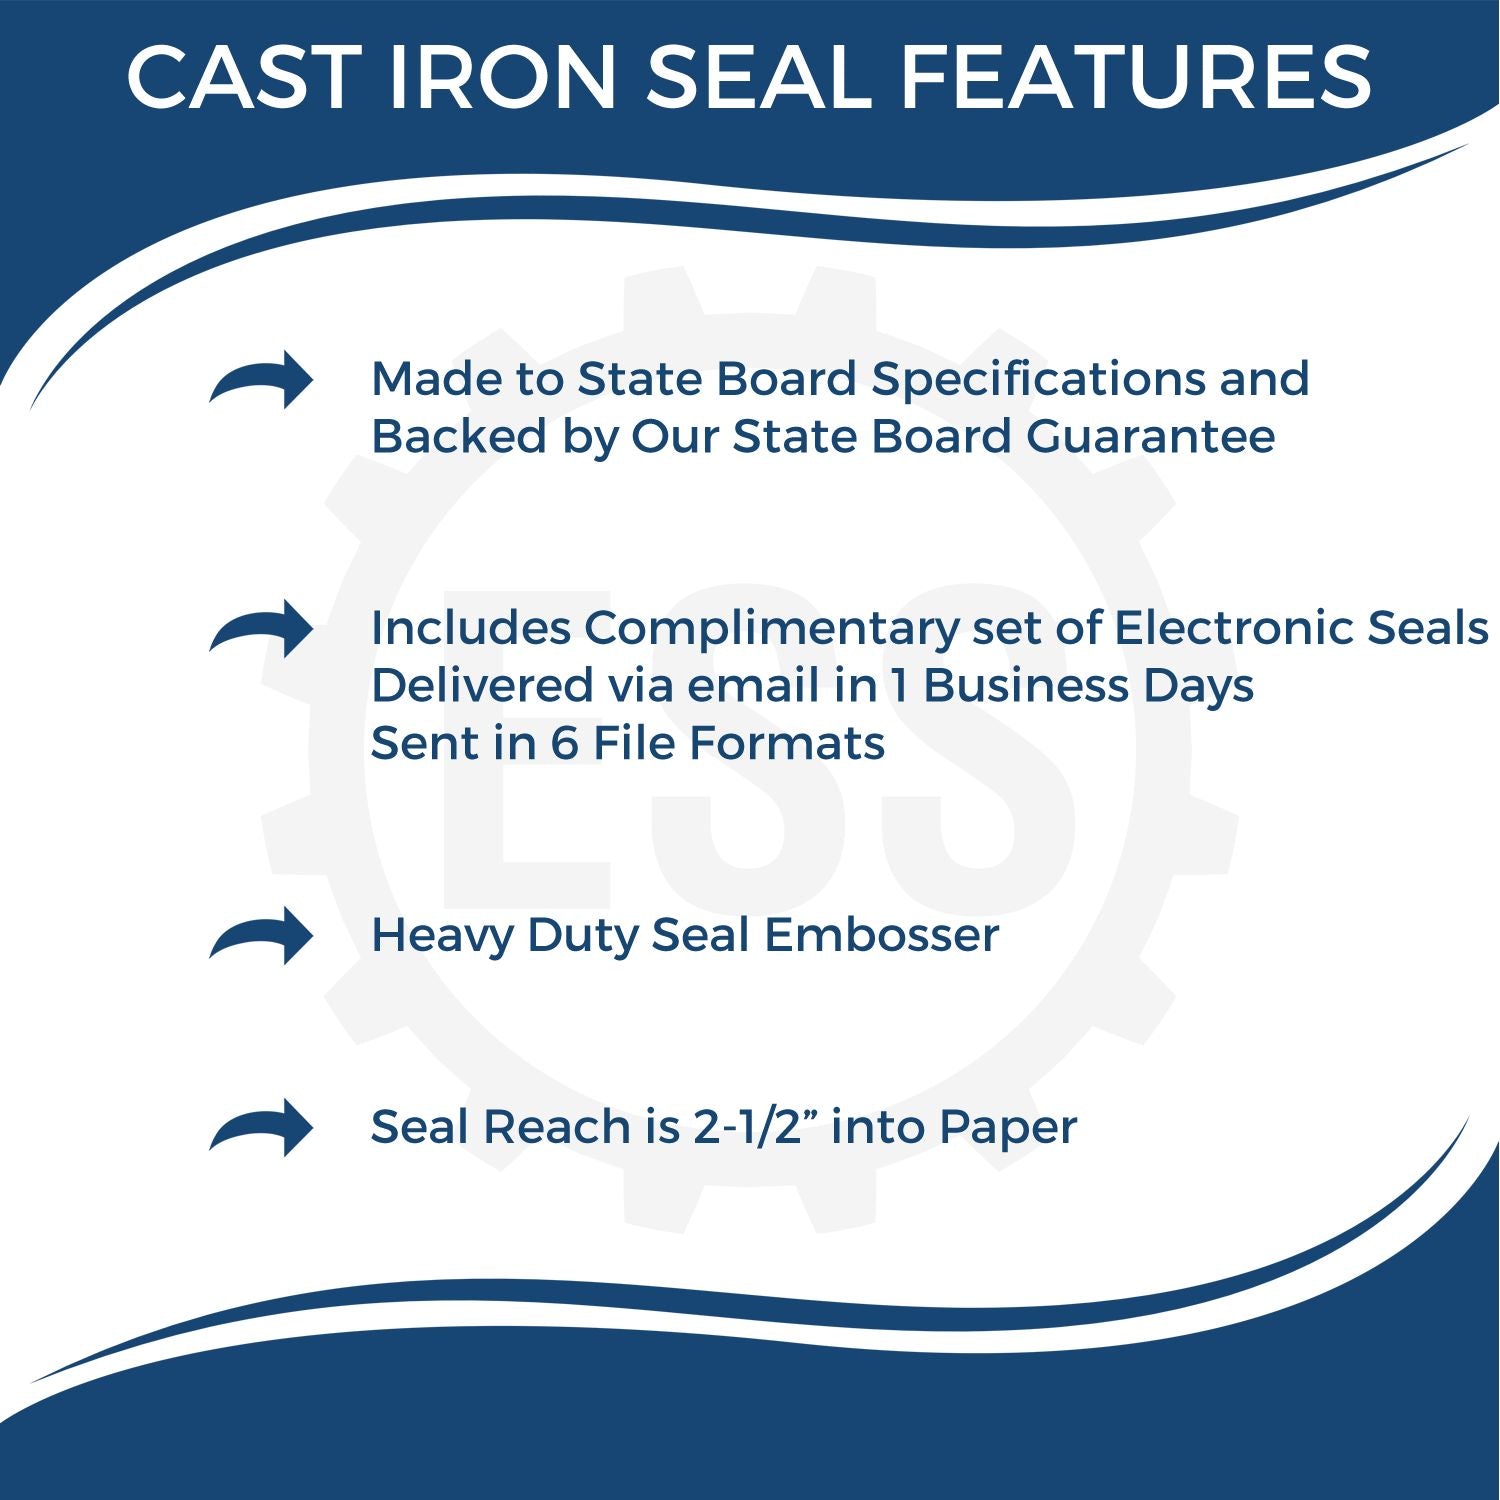 The main image for the Heavy Duty Cast Iron Connecticut Engineer Seal Embosser depicting a sample of the imprint and electronic files